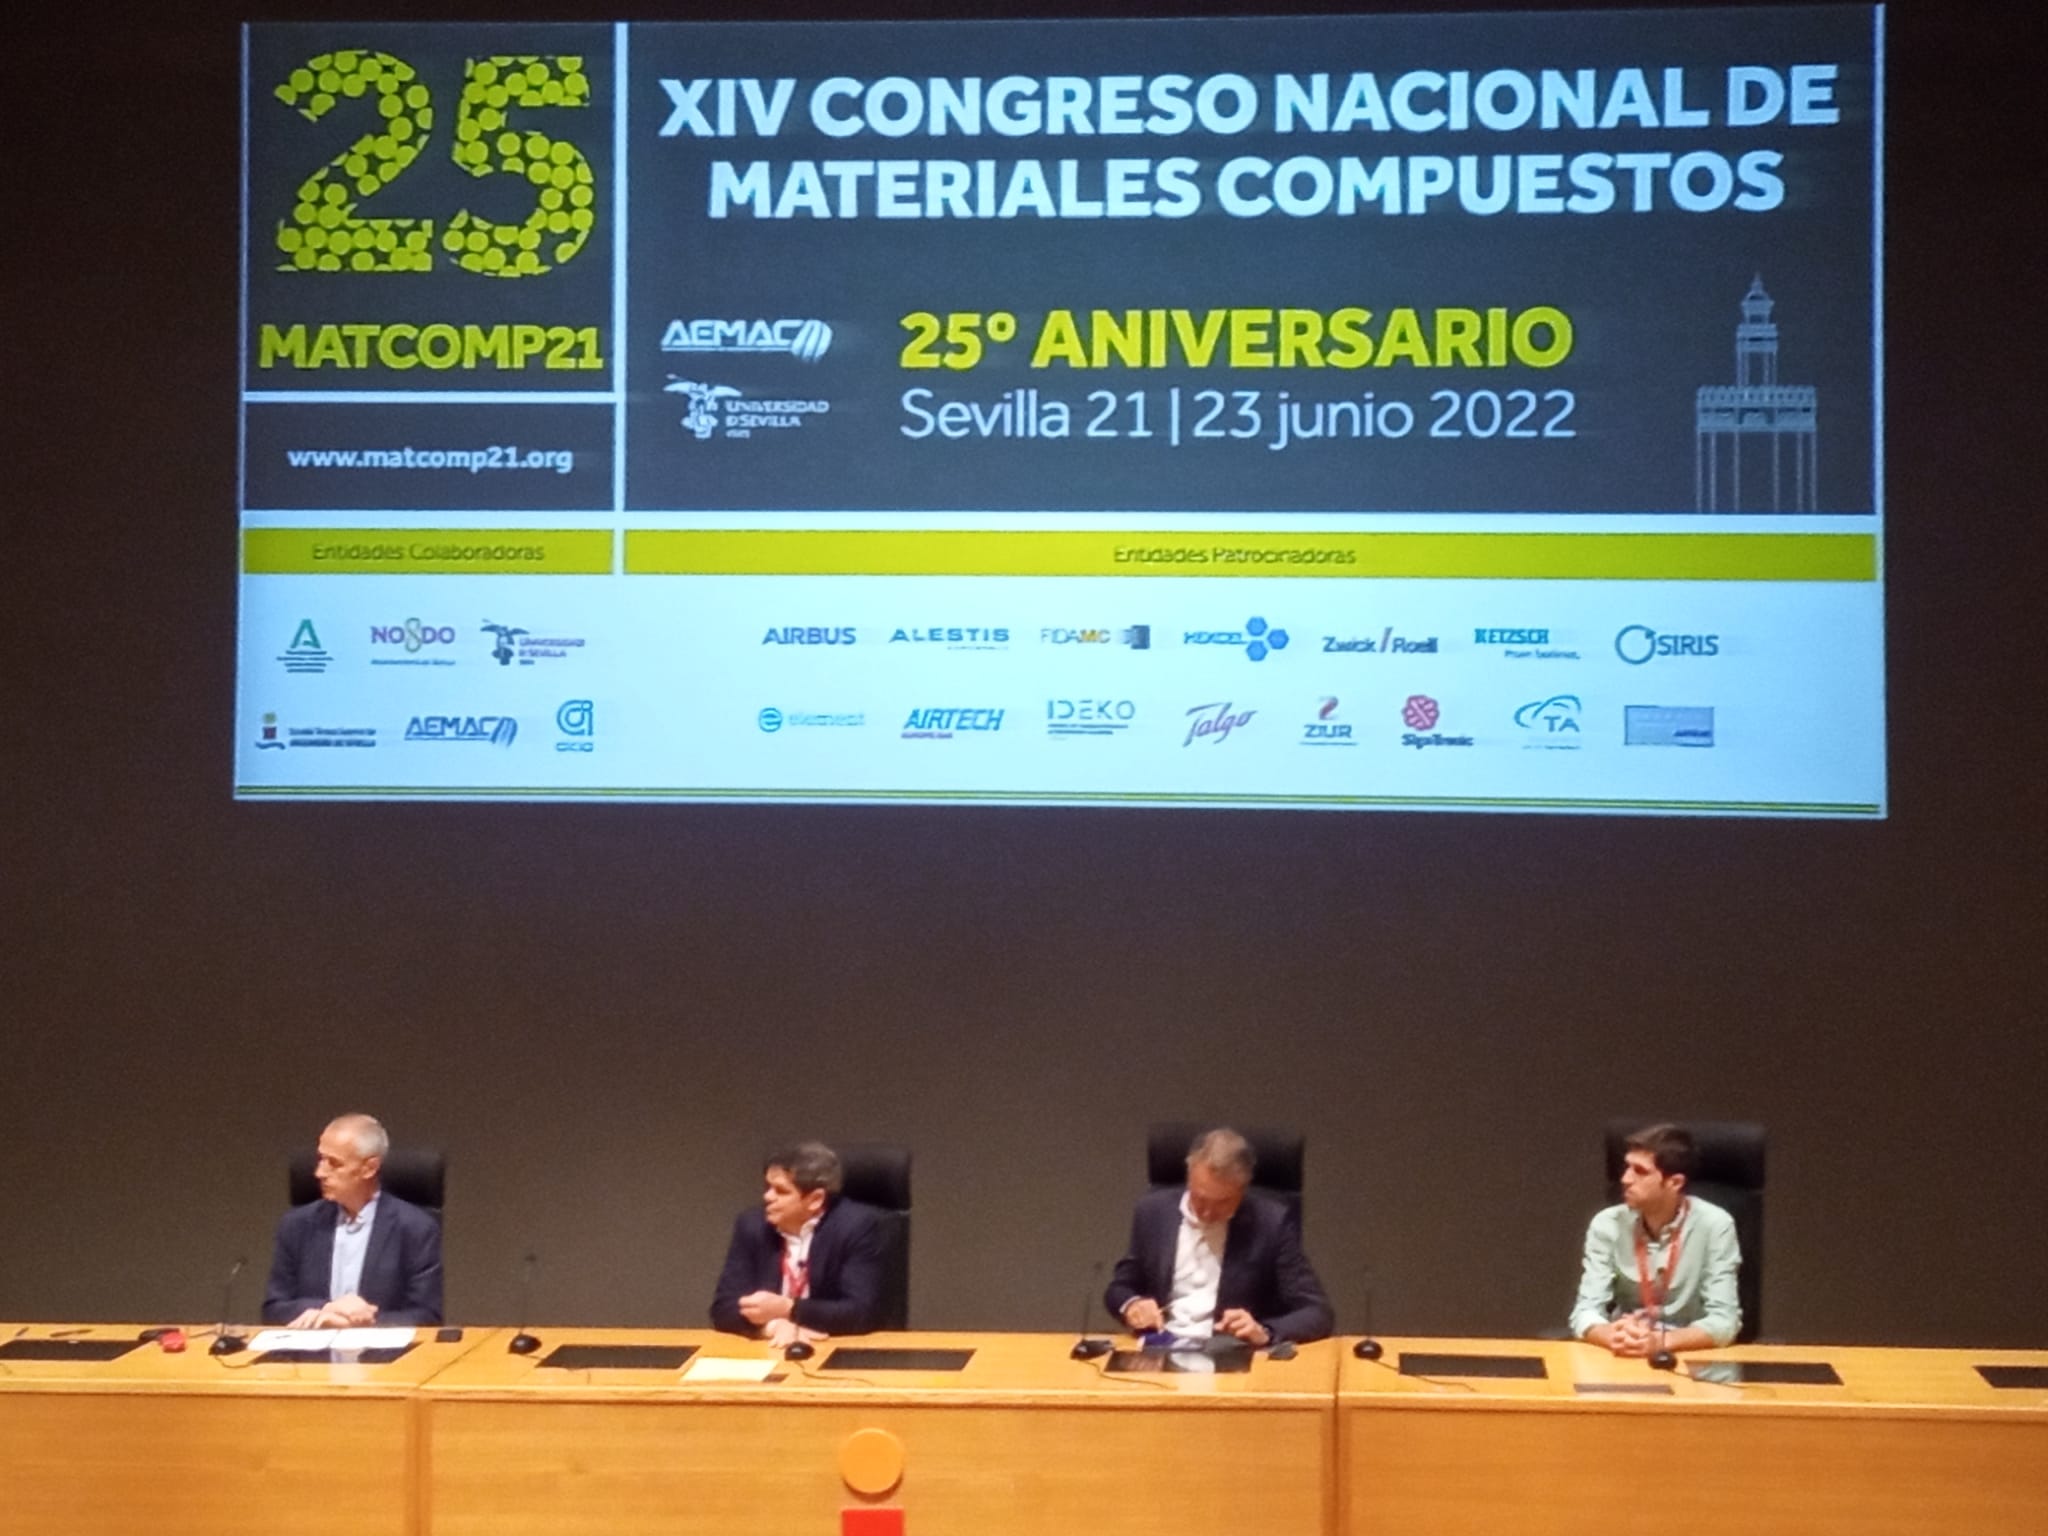 IDEKO presents its latest technological advances in composites at the 14th MATCOMP 2022 Congress